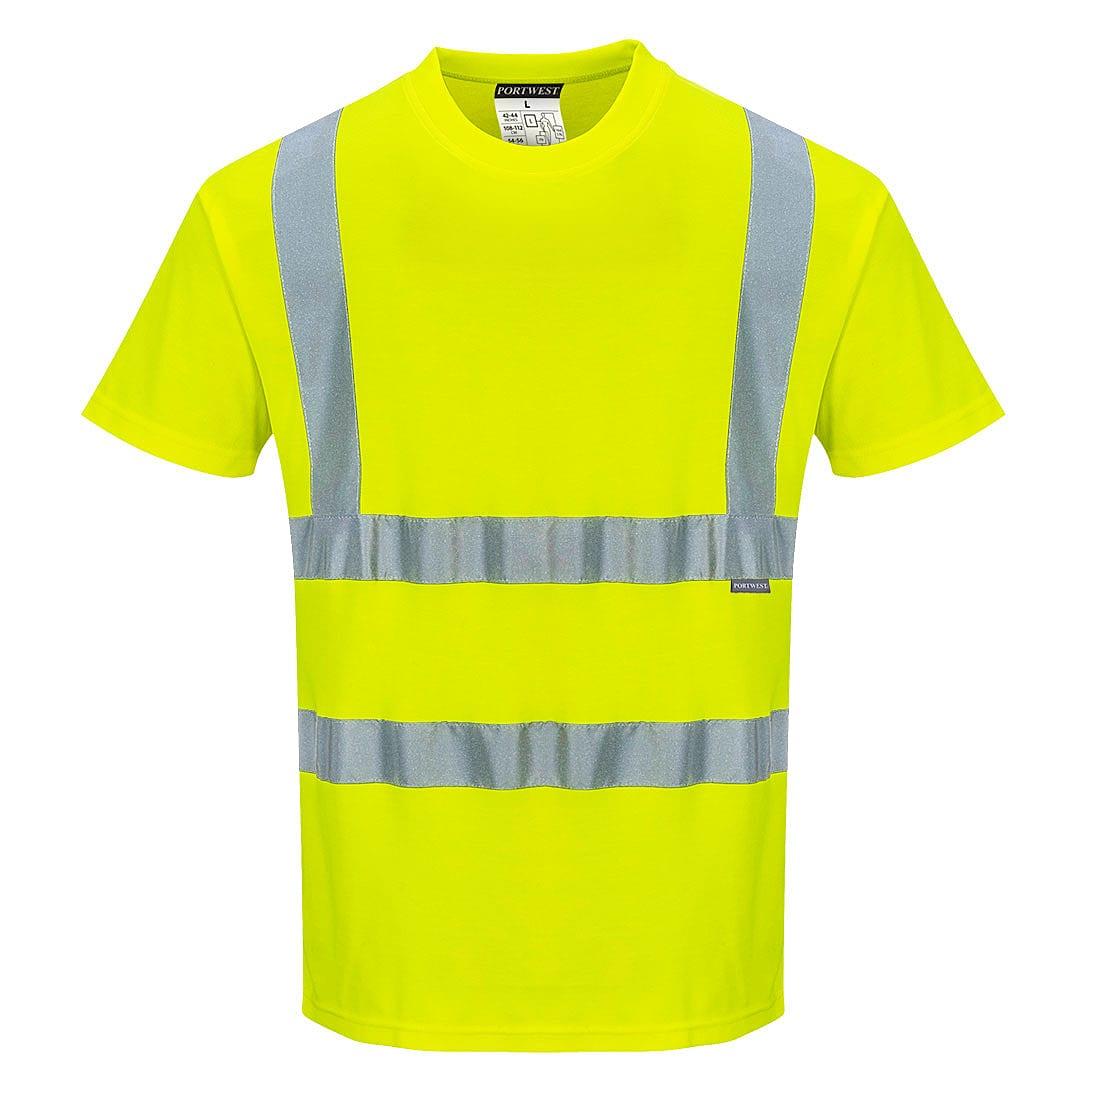 Portwest Cotton Comfort Short-Sleeve T-Shirt in Yellow (Product Code: S170)